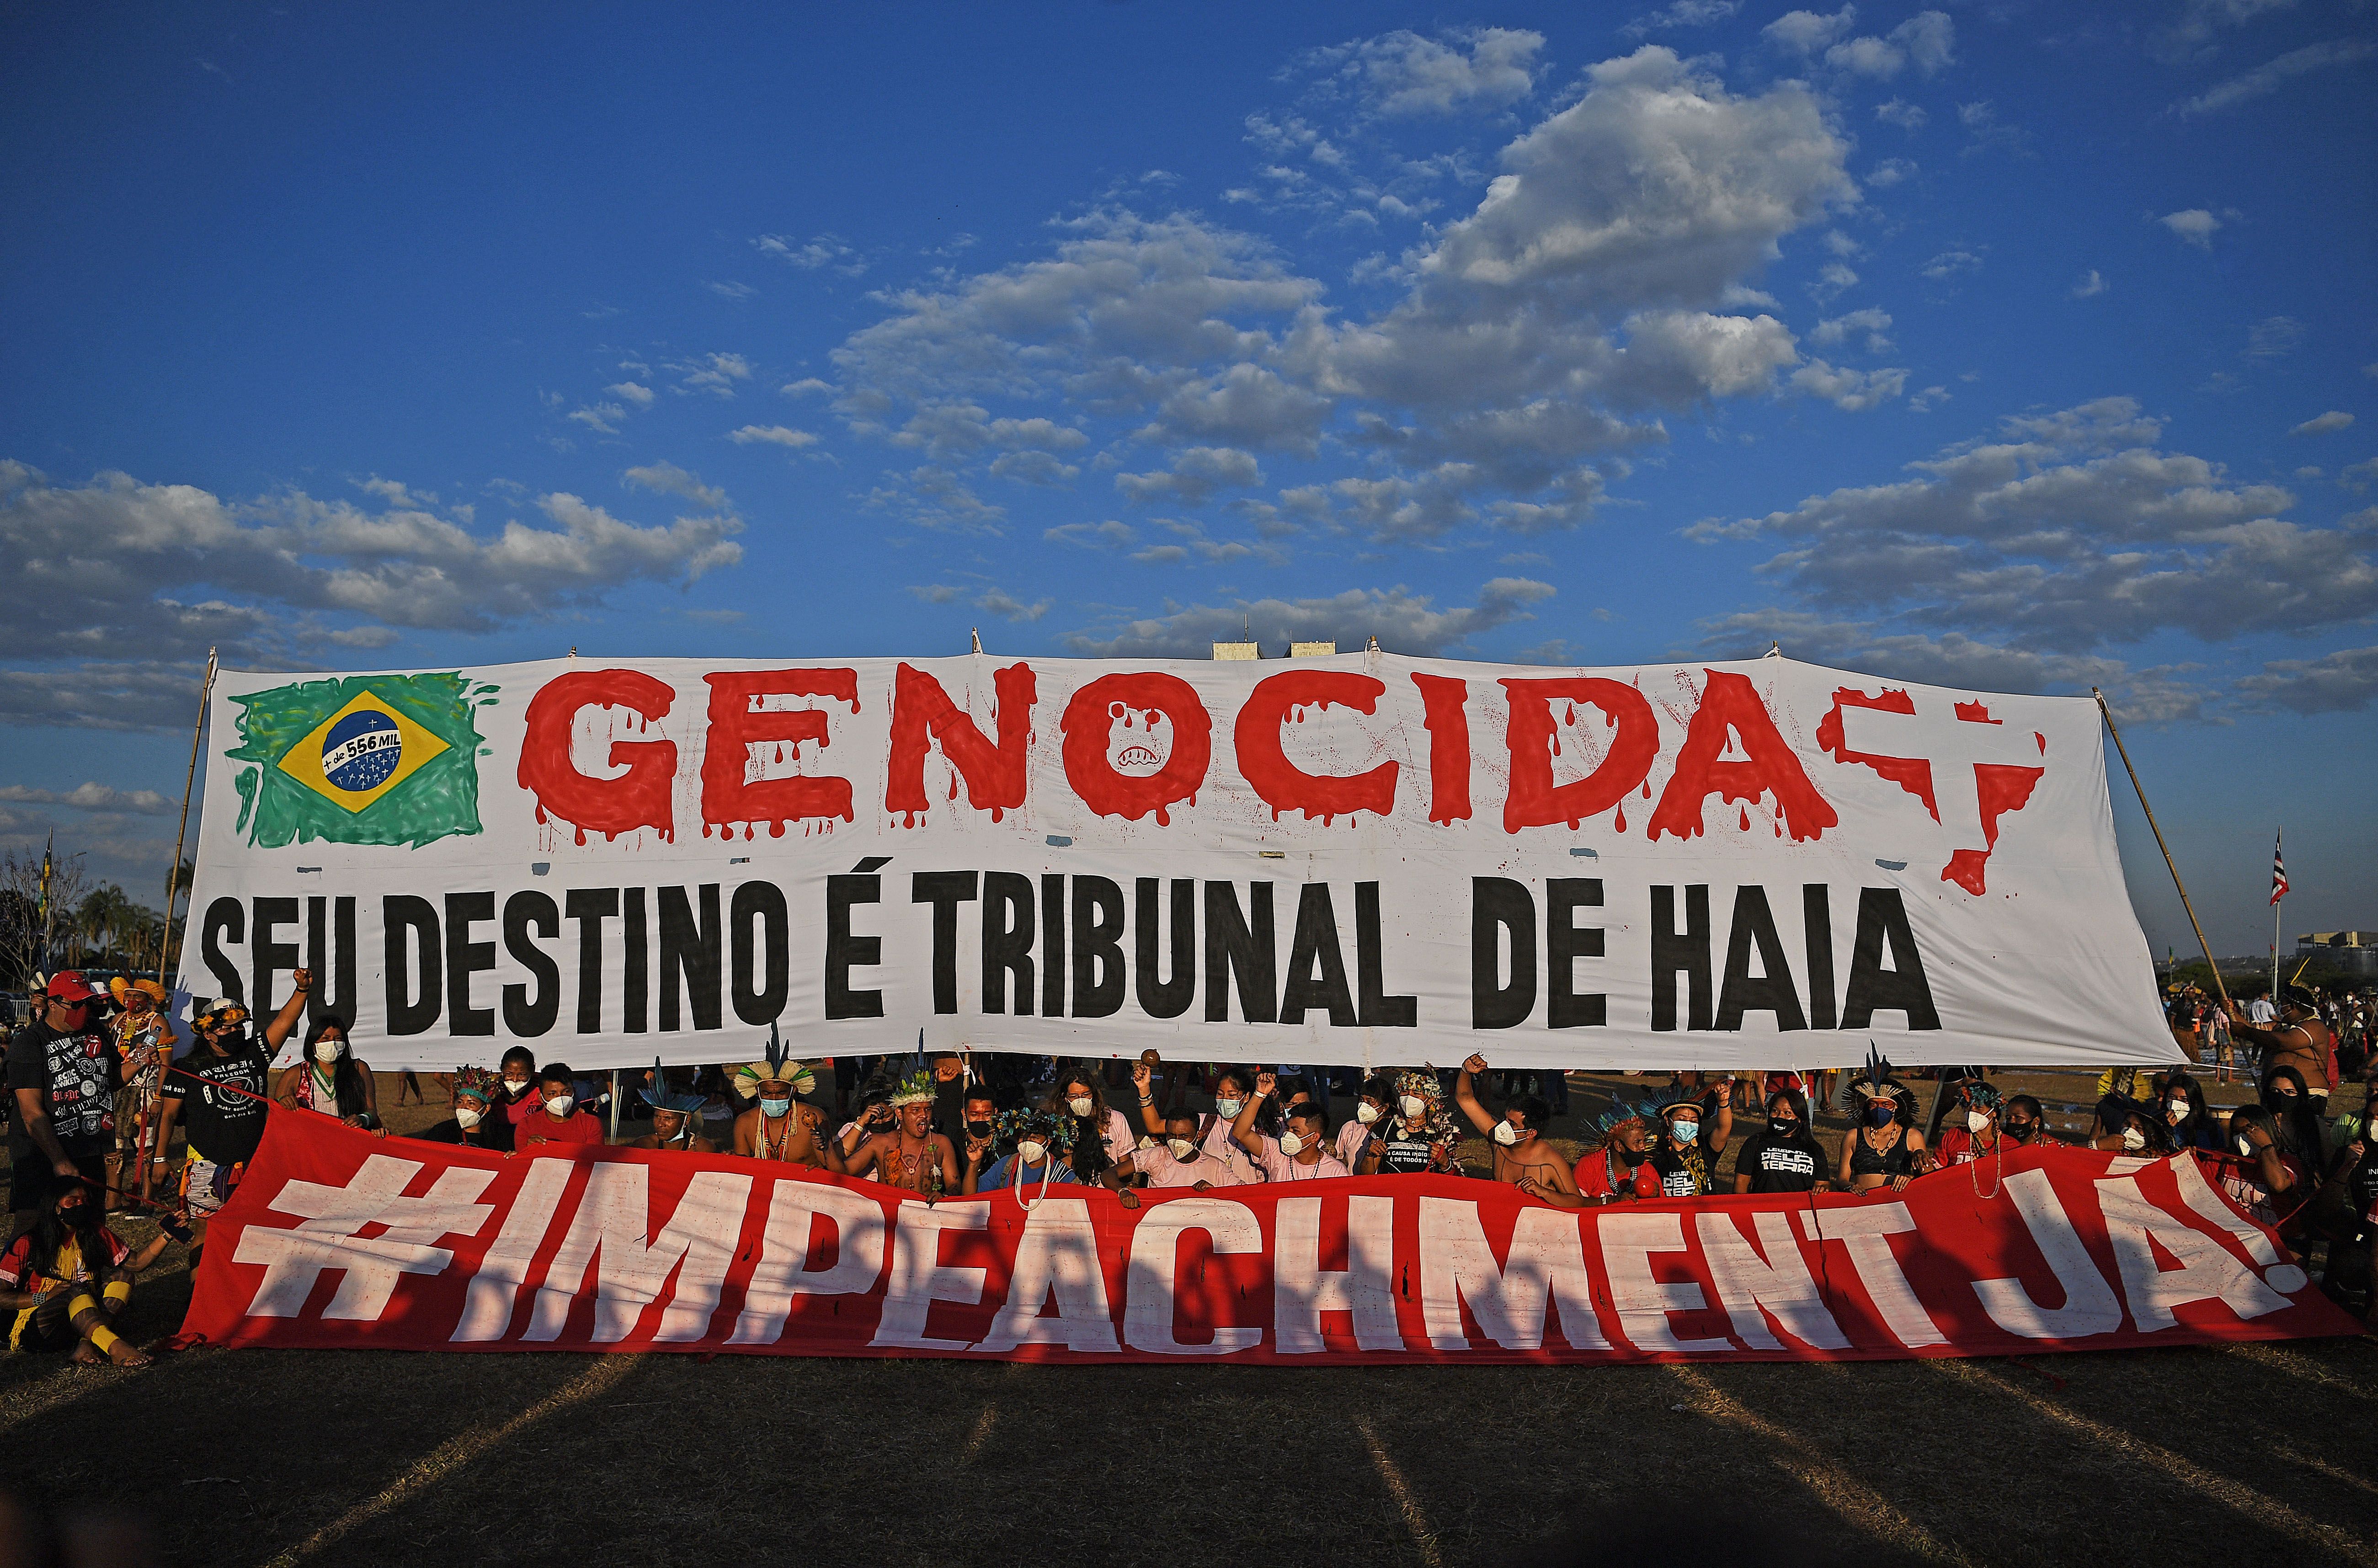 Photo of Indigenous people holding up 2 banners that say: "Genocides, your fate is the Hague court" and "Impeachment" in Portuguese